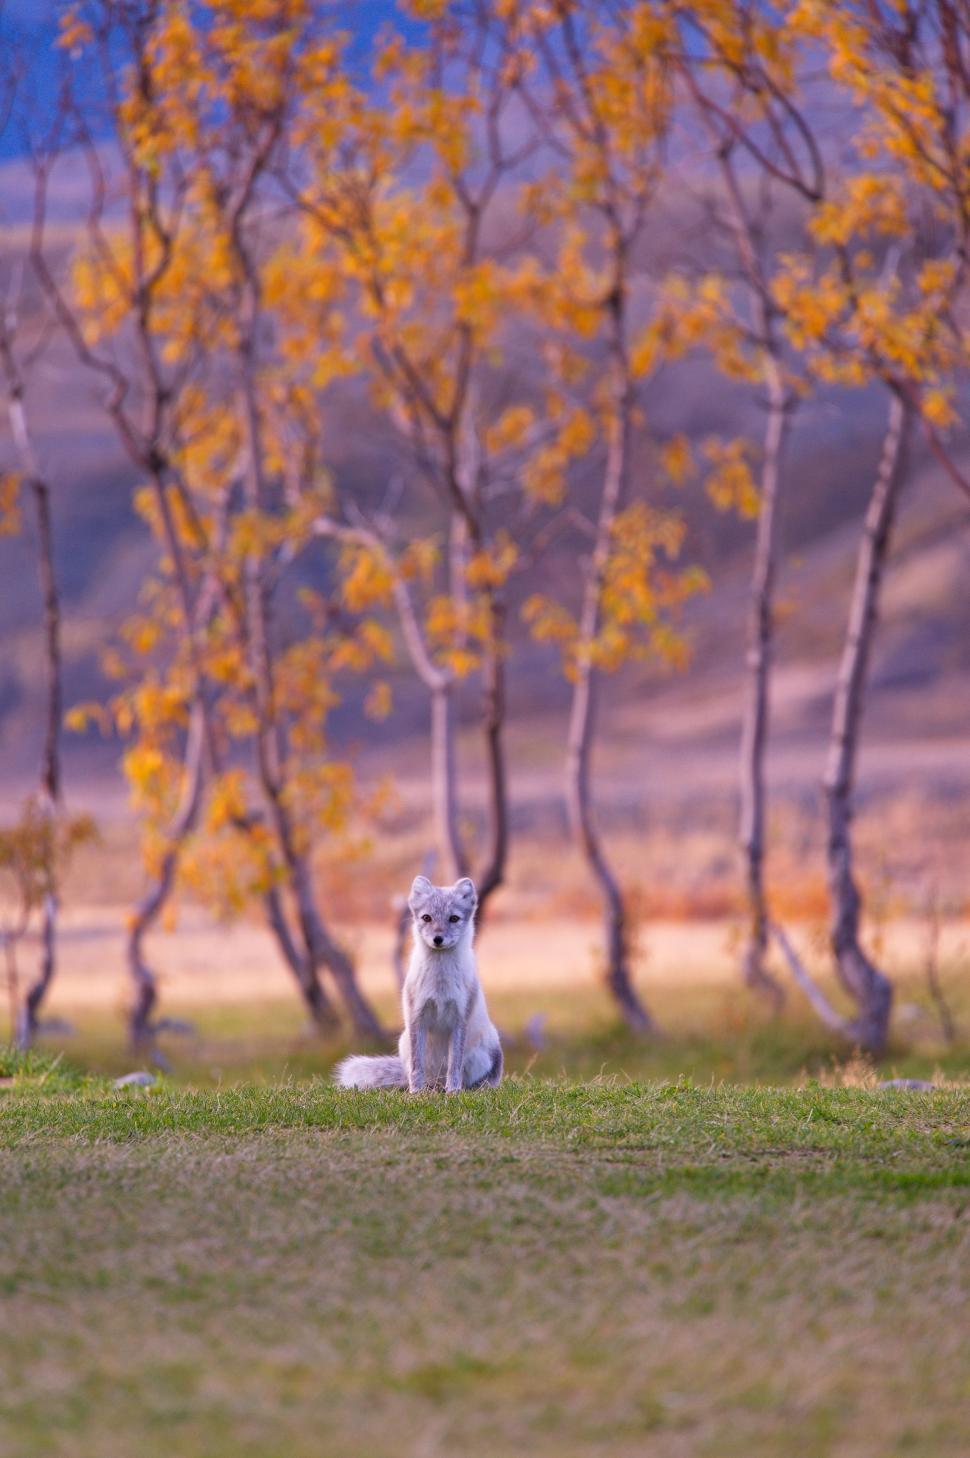 Free Image of Cat Sitting in Grass in Front of Trees 